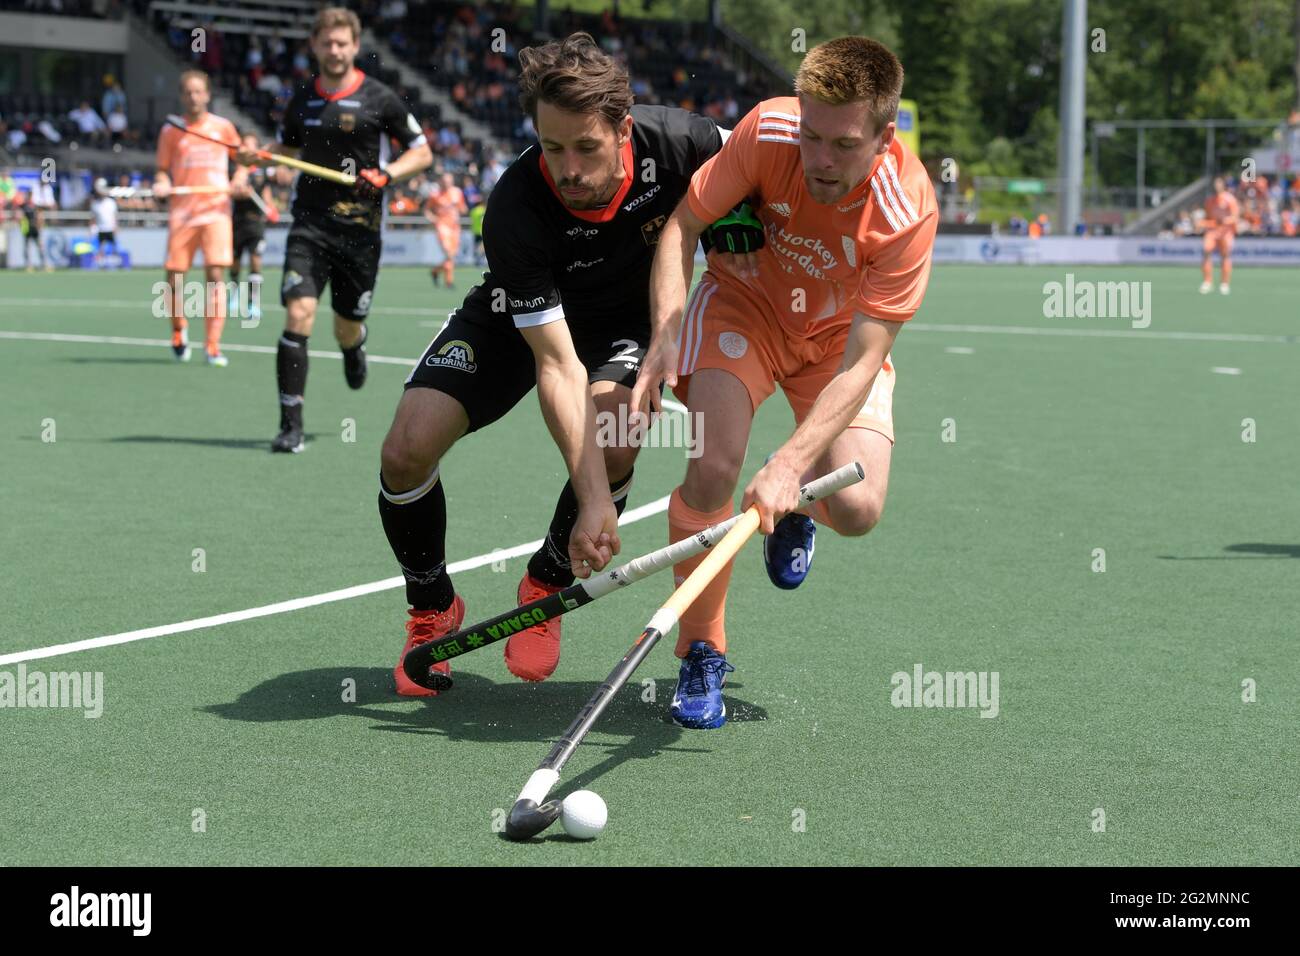 AMSTELVEEN, NETHERLANDS - JUNE 12: Benedikt Furk of Germany, Thierry Brinkman of the Netherlands during the Euro Hockey Championships Men match between Germany and Netherlands at Wagener Stadion on June 12, 2021 in Amstelveen, Netherlands (Photo by Gerrit van Keulen/Orange Pictures) Stock Photo